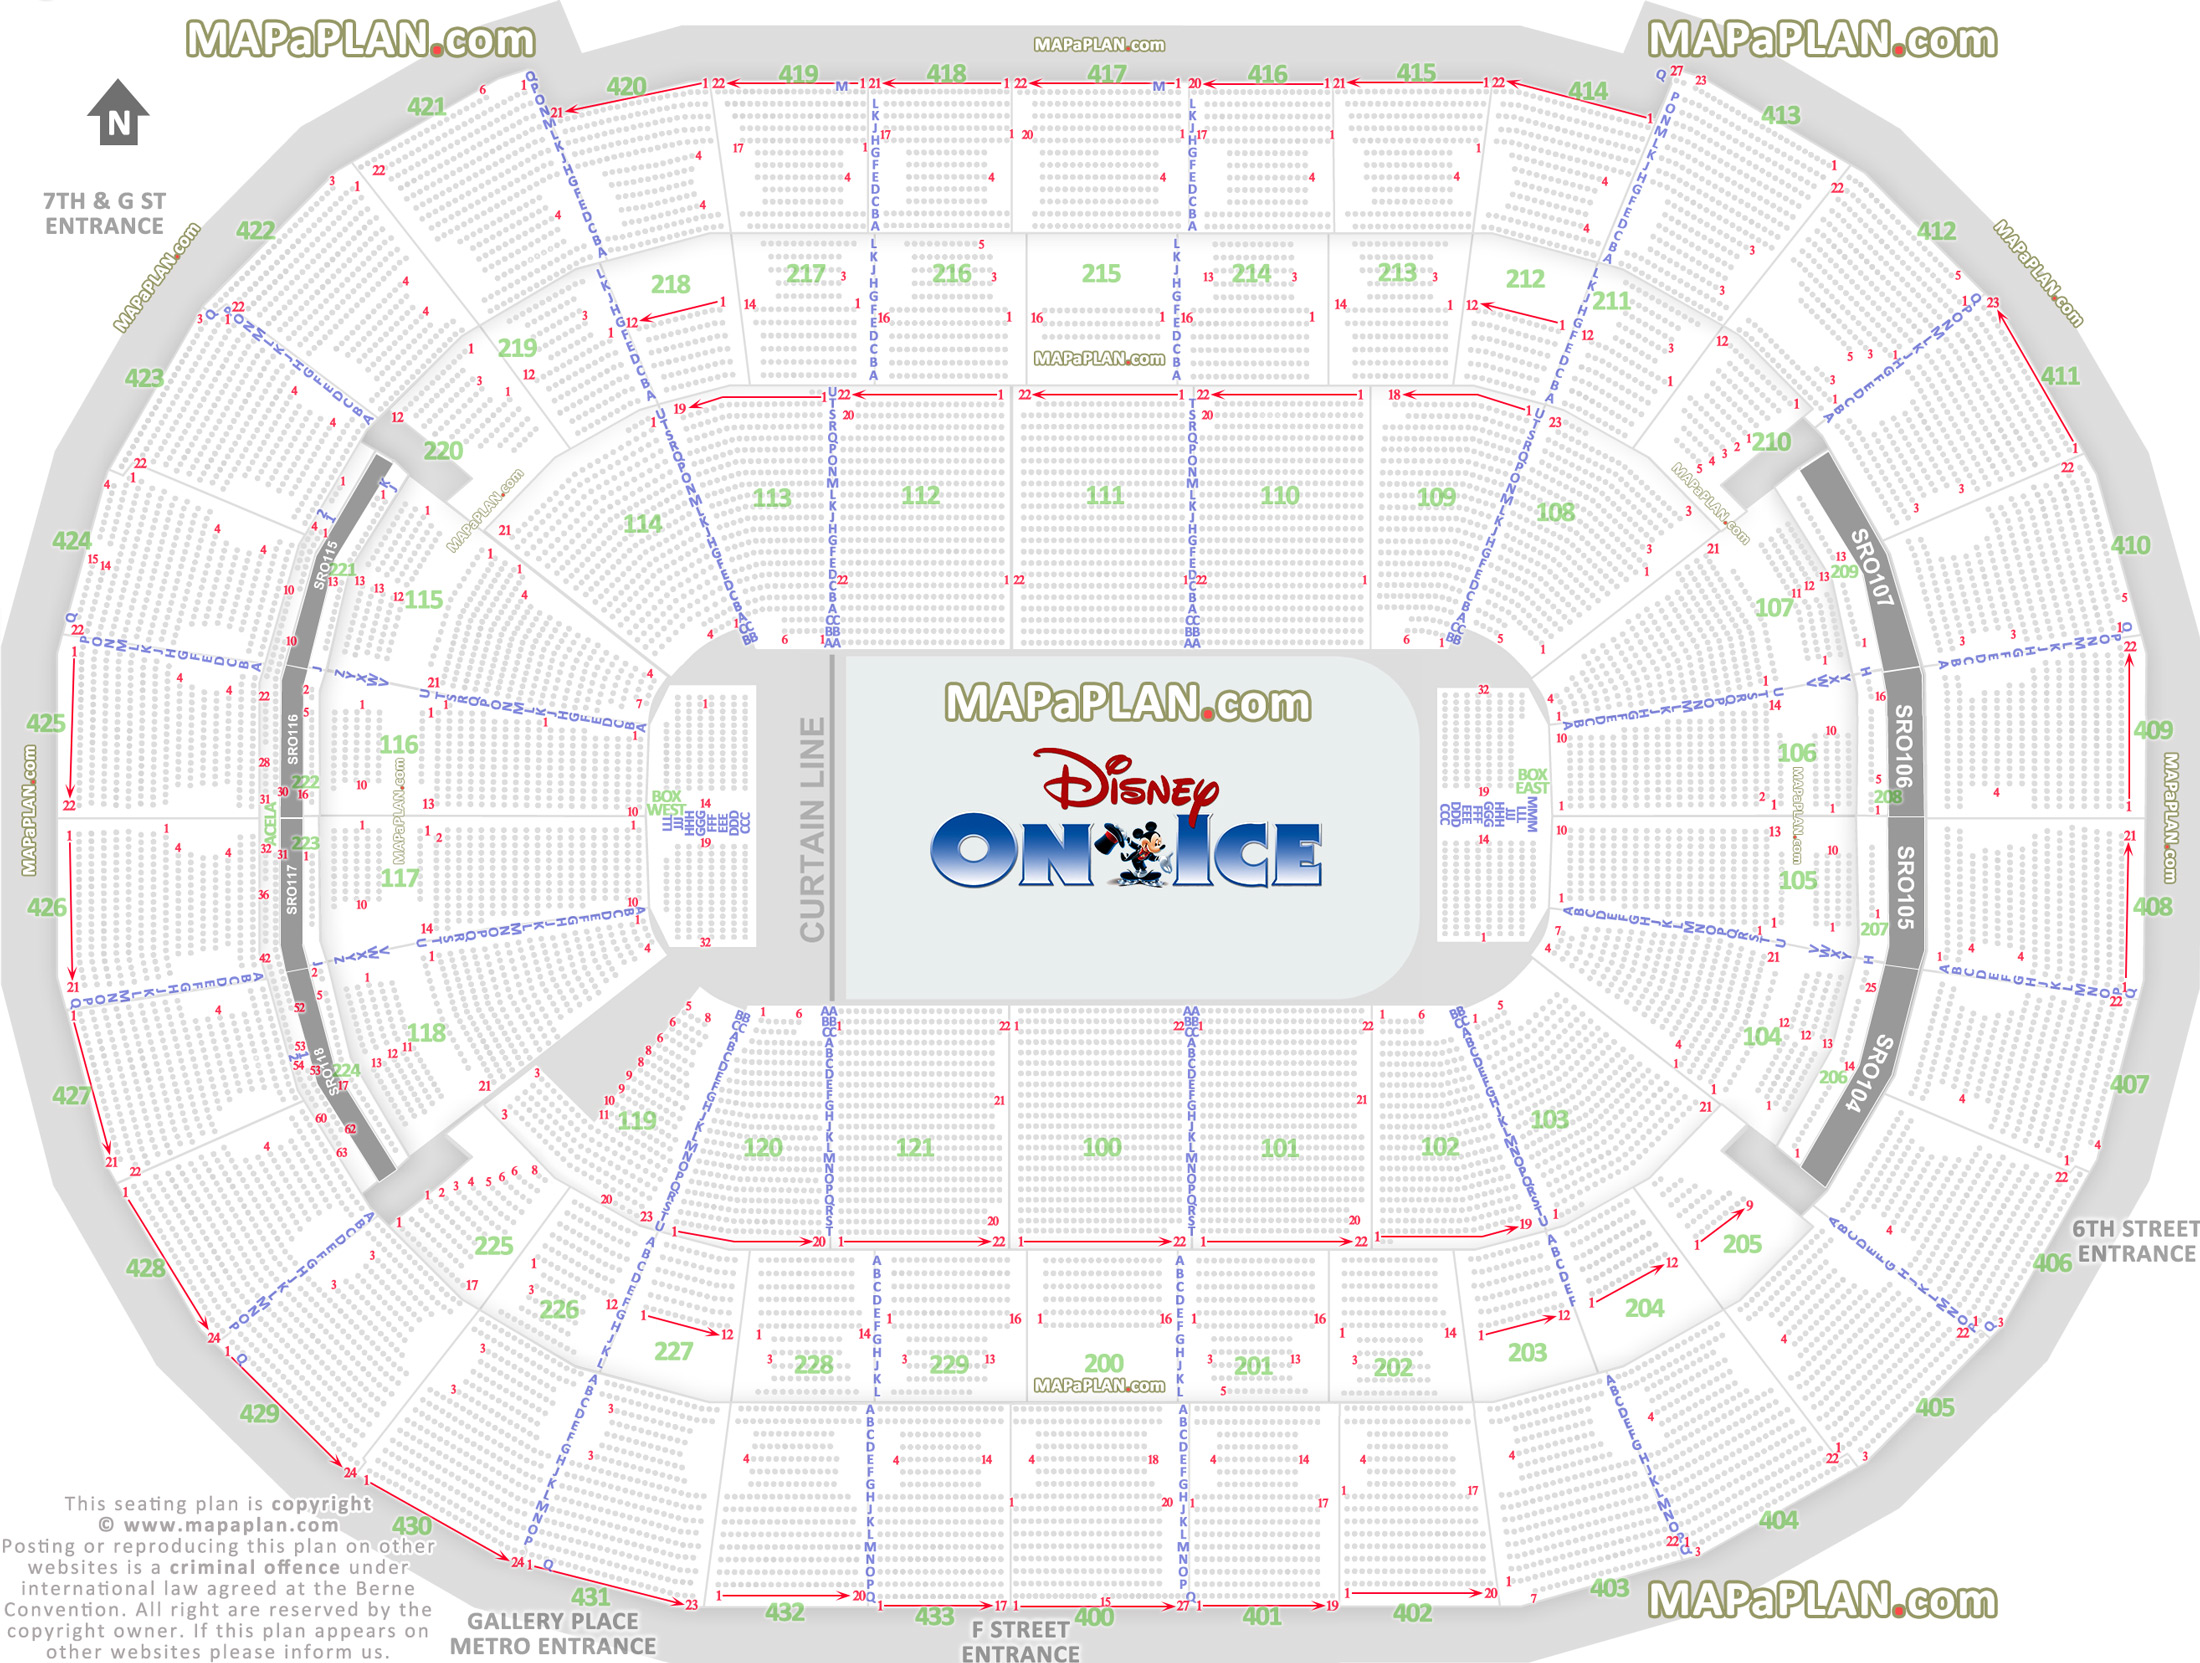 disney on ice show seating review printable good seats information guide entrance gates bowl numbering Washington DC Capital One Arena Center seating chart